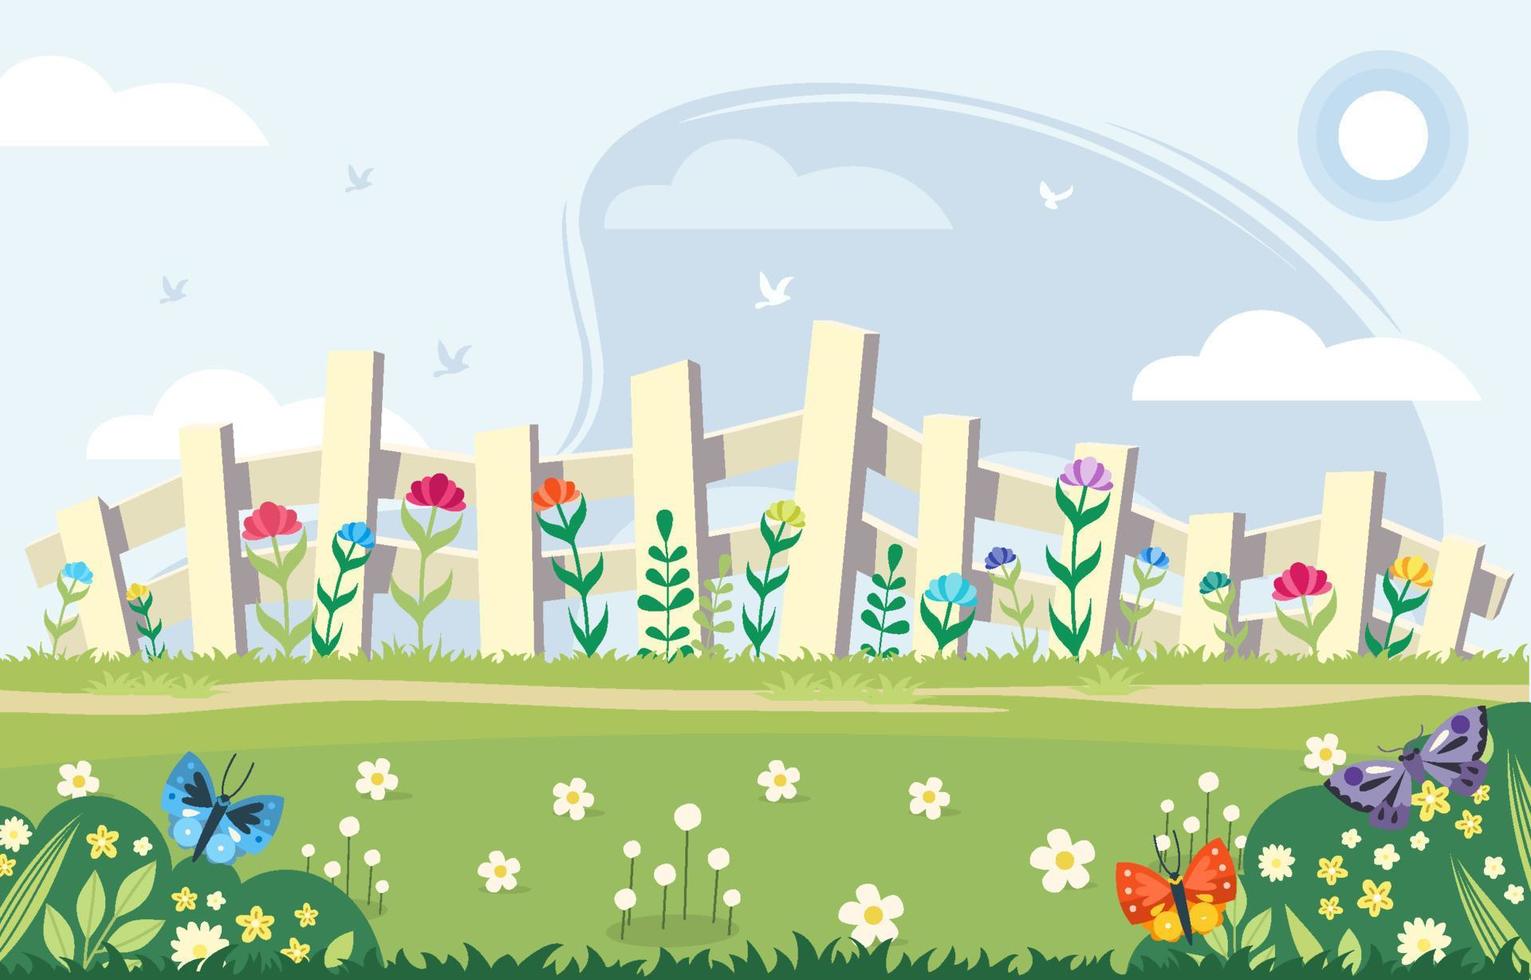 Flower Garden With Fence In Spring Concept vector